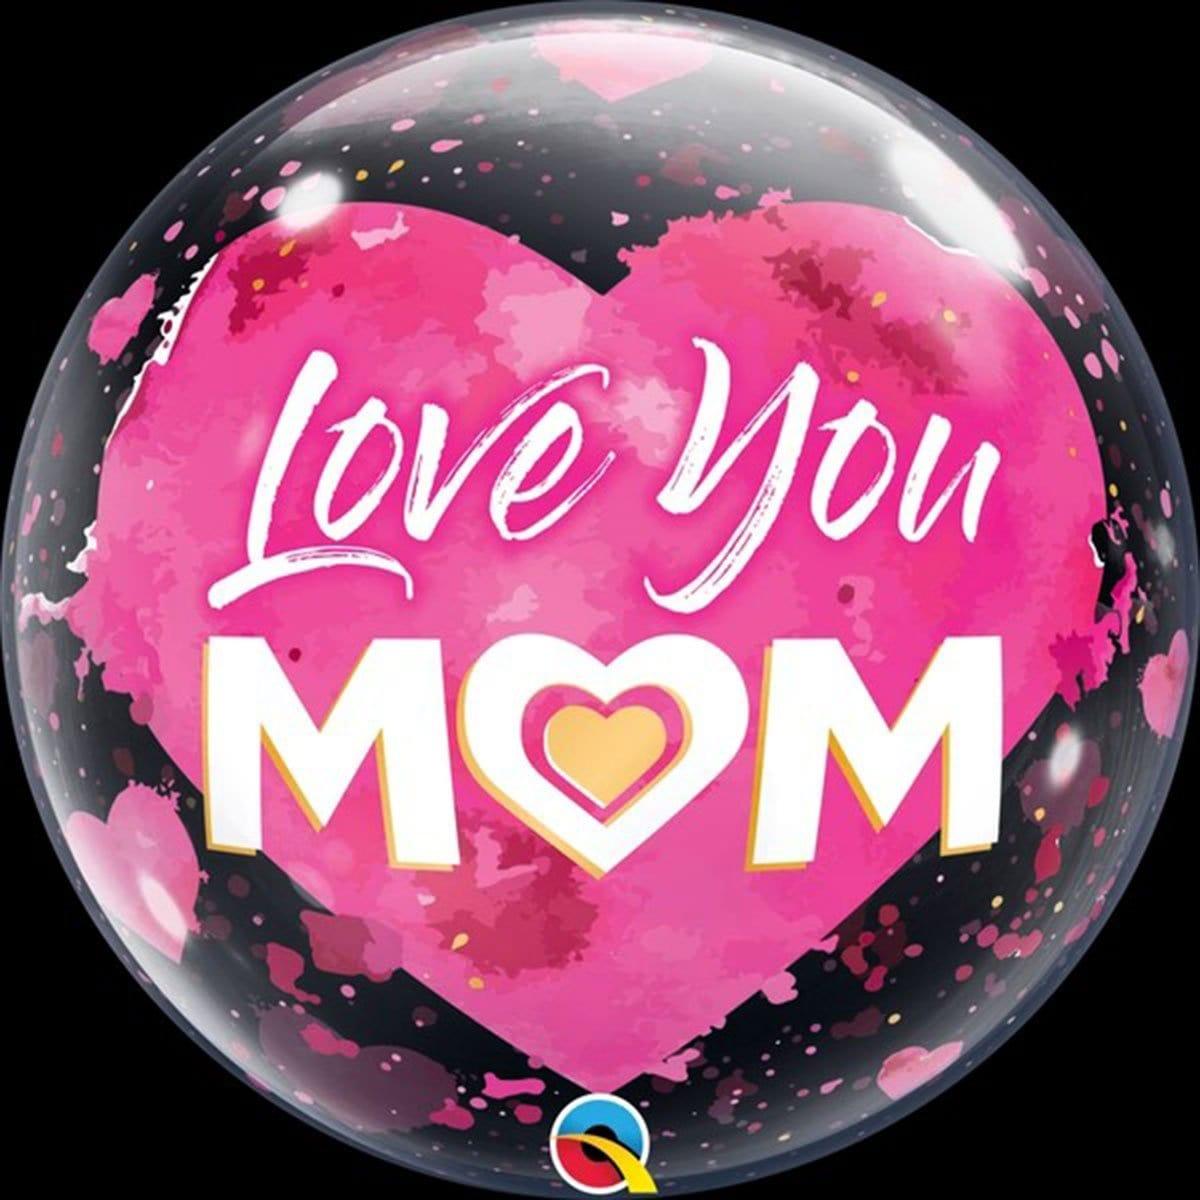 Buy Balloons Love You Mom Bubble Balloon sold at Party Expert